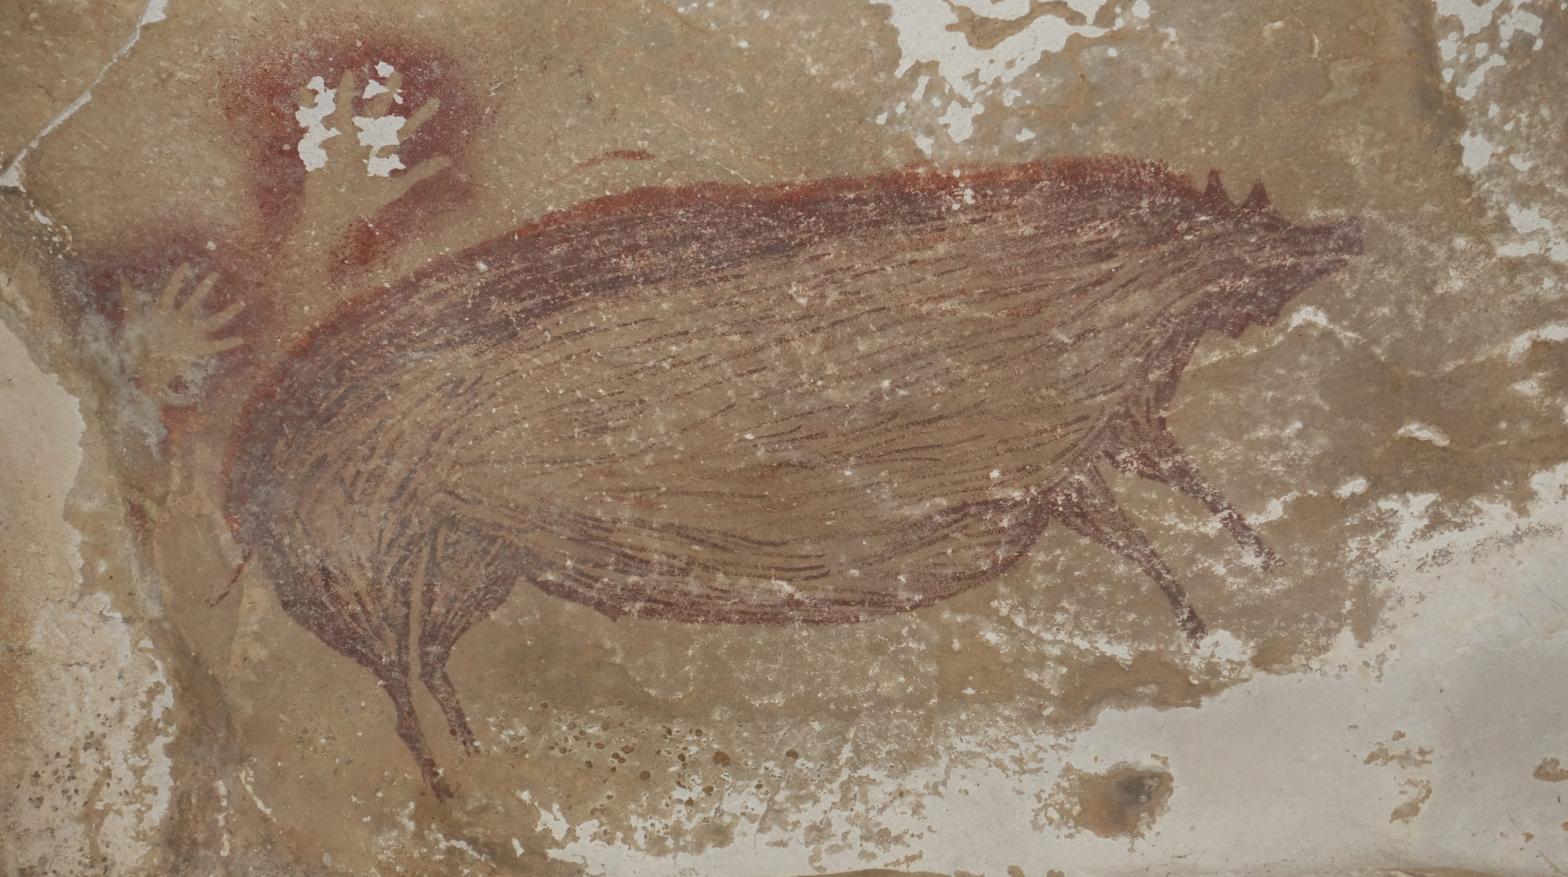 The painting of a warty pig at the Leang Tedongnge cave site in Indonesia.  (Image: Maxime Aubert)